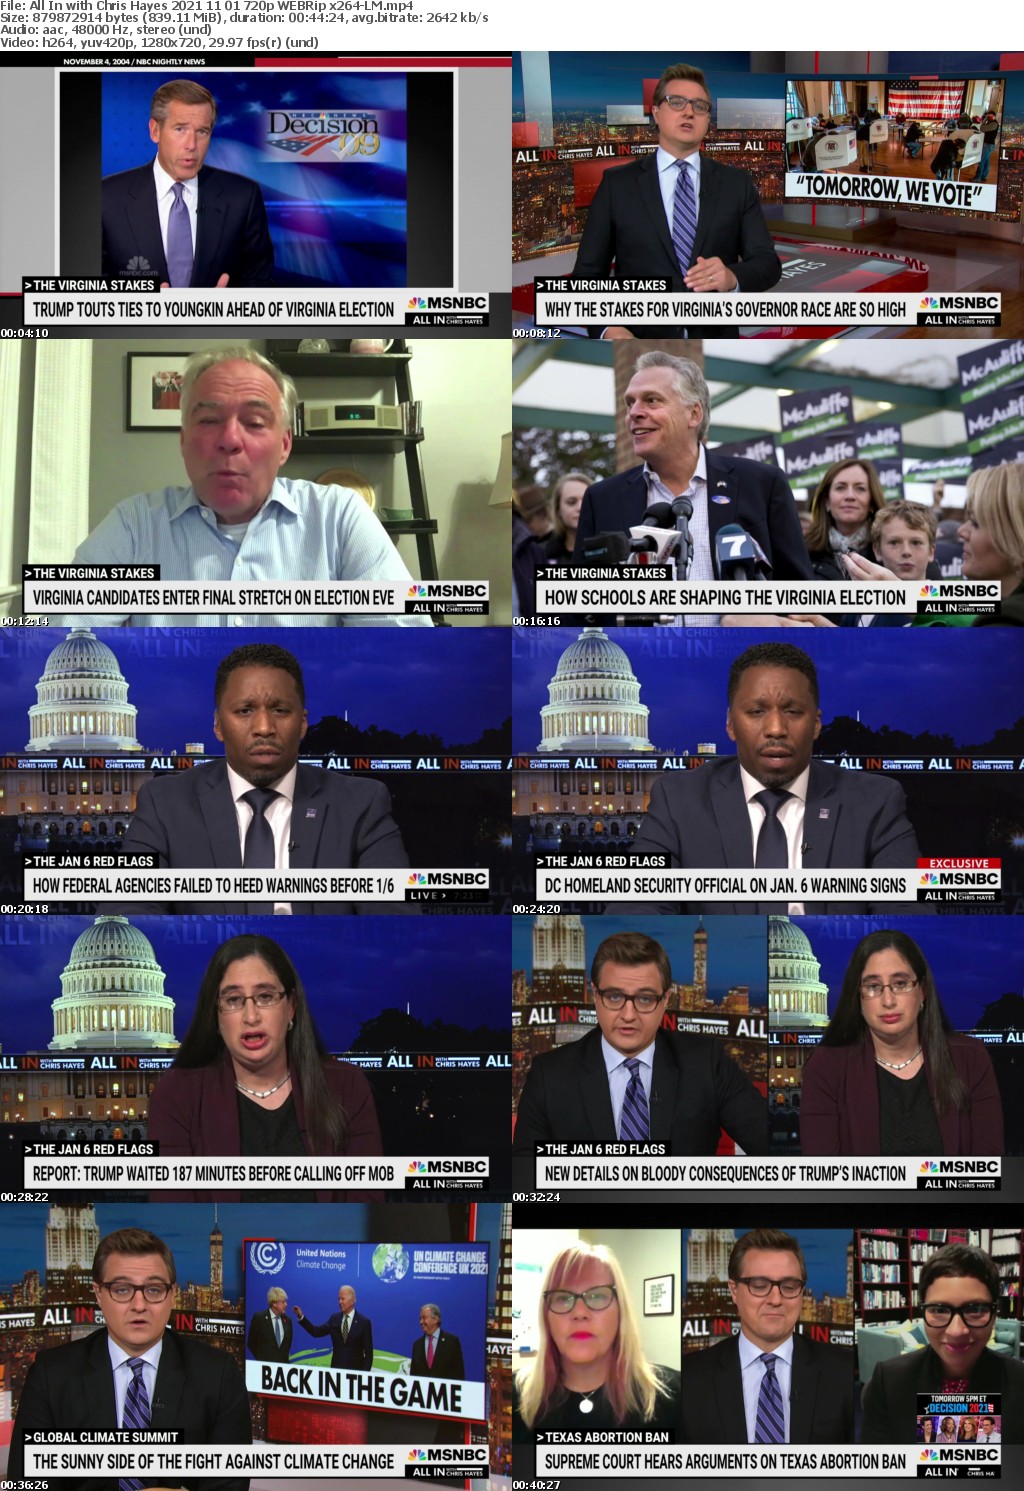 All In with Chris Hayes 2021 11 01 720p WEBRip x264-LM